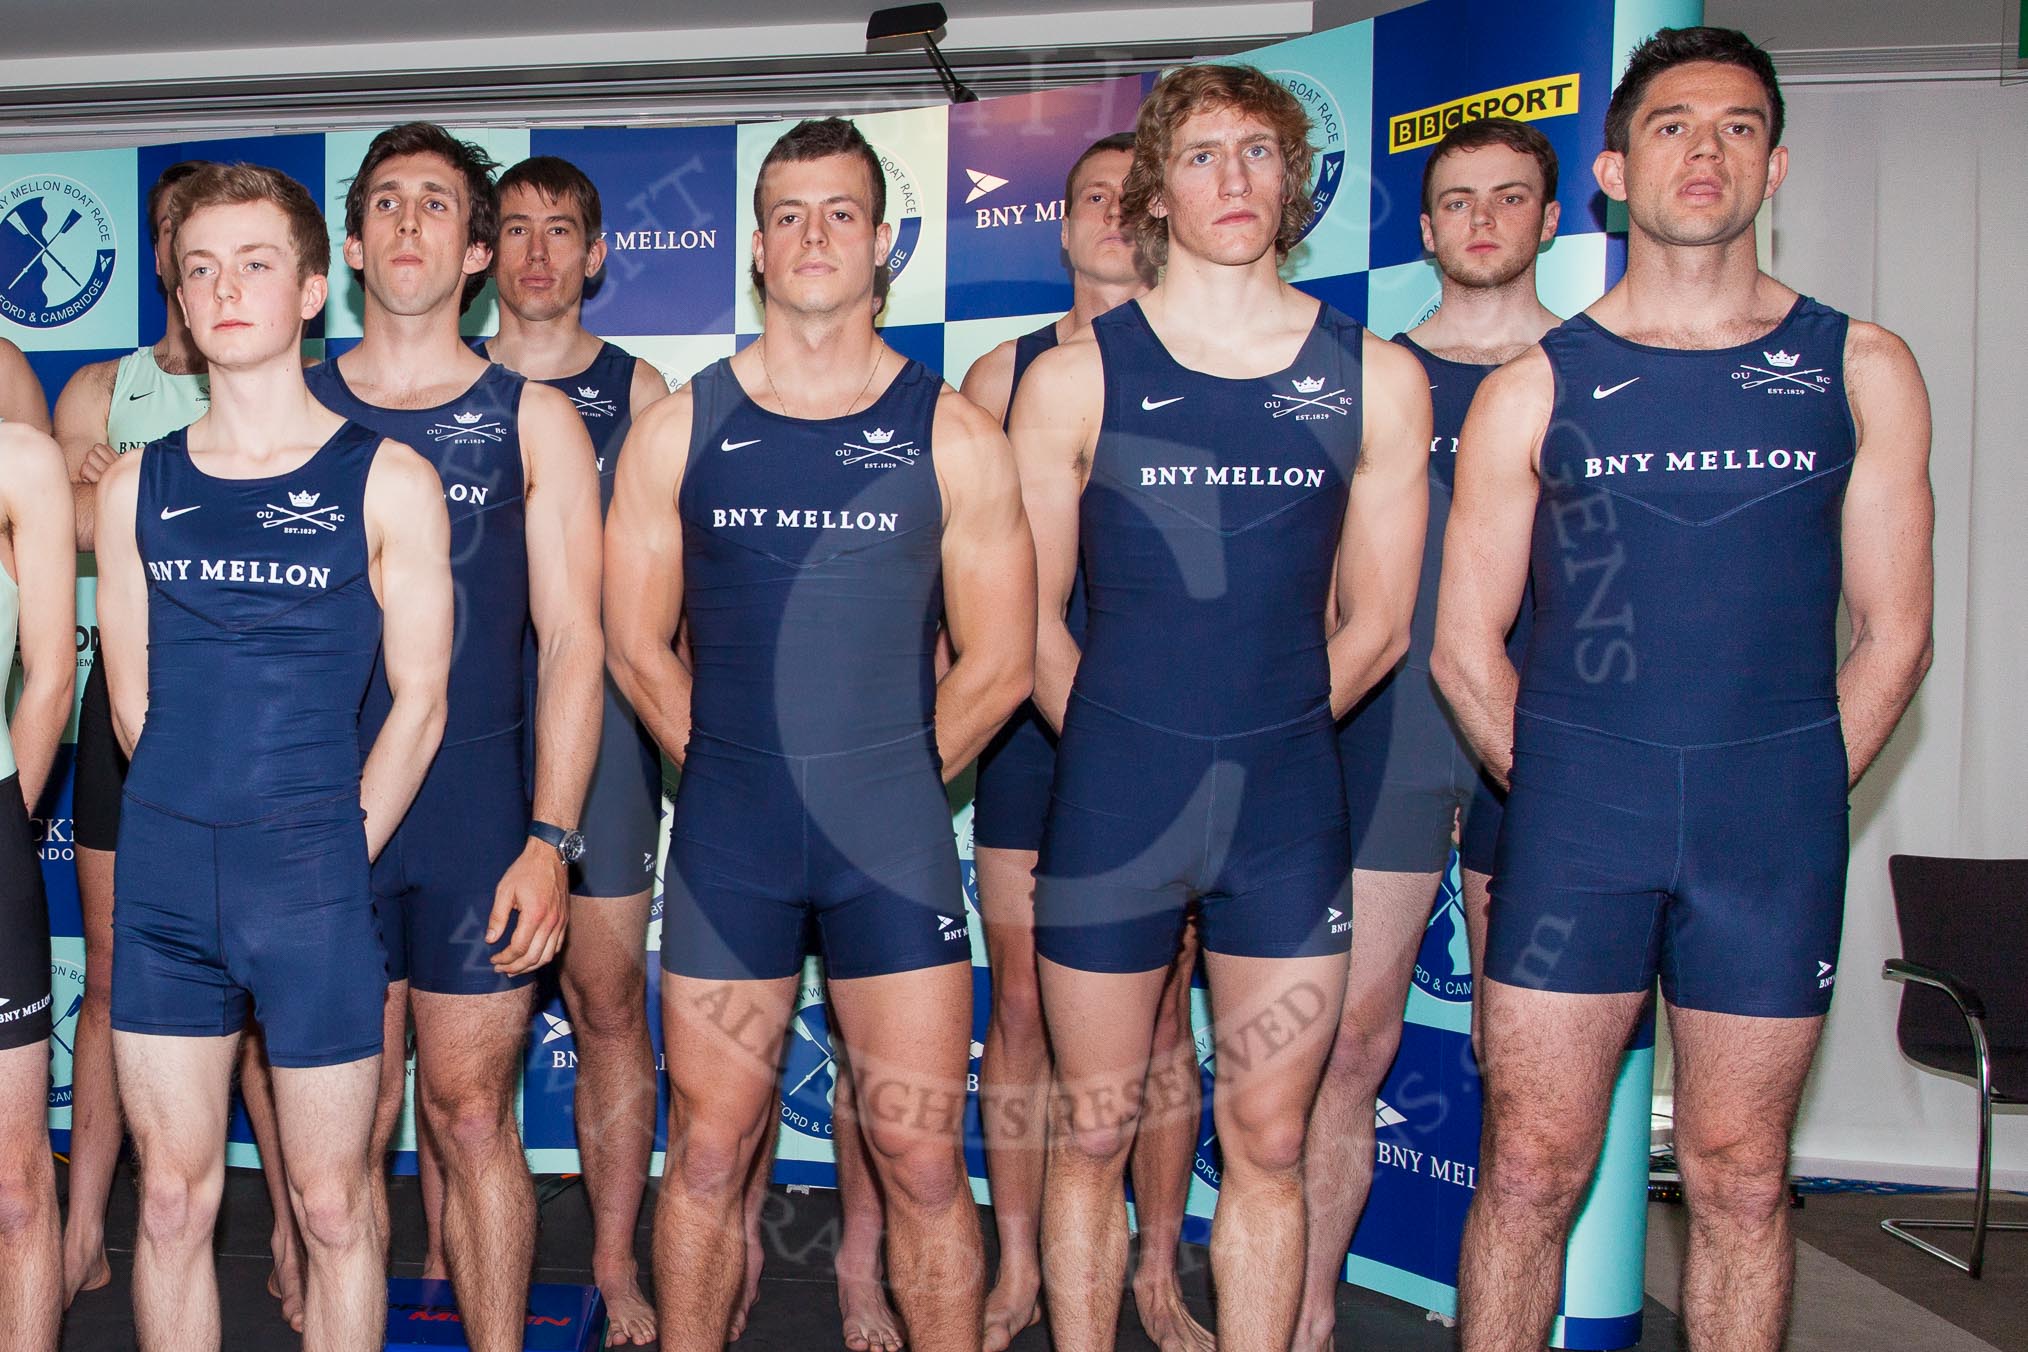 The Boat Race season 2014 - Crew Announcement and Weigh In: Group shot - The Boat Race 2014 crews together on stage, here the Oxford men..
BNY Mellon Centre,
London EC4V 4LA,
London,
United Kingdom,
on 10 March 2014 at 12:11, image #128